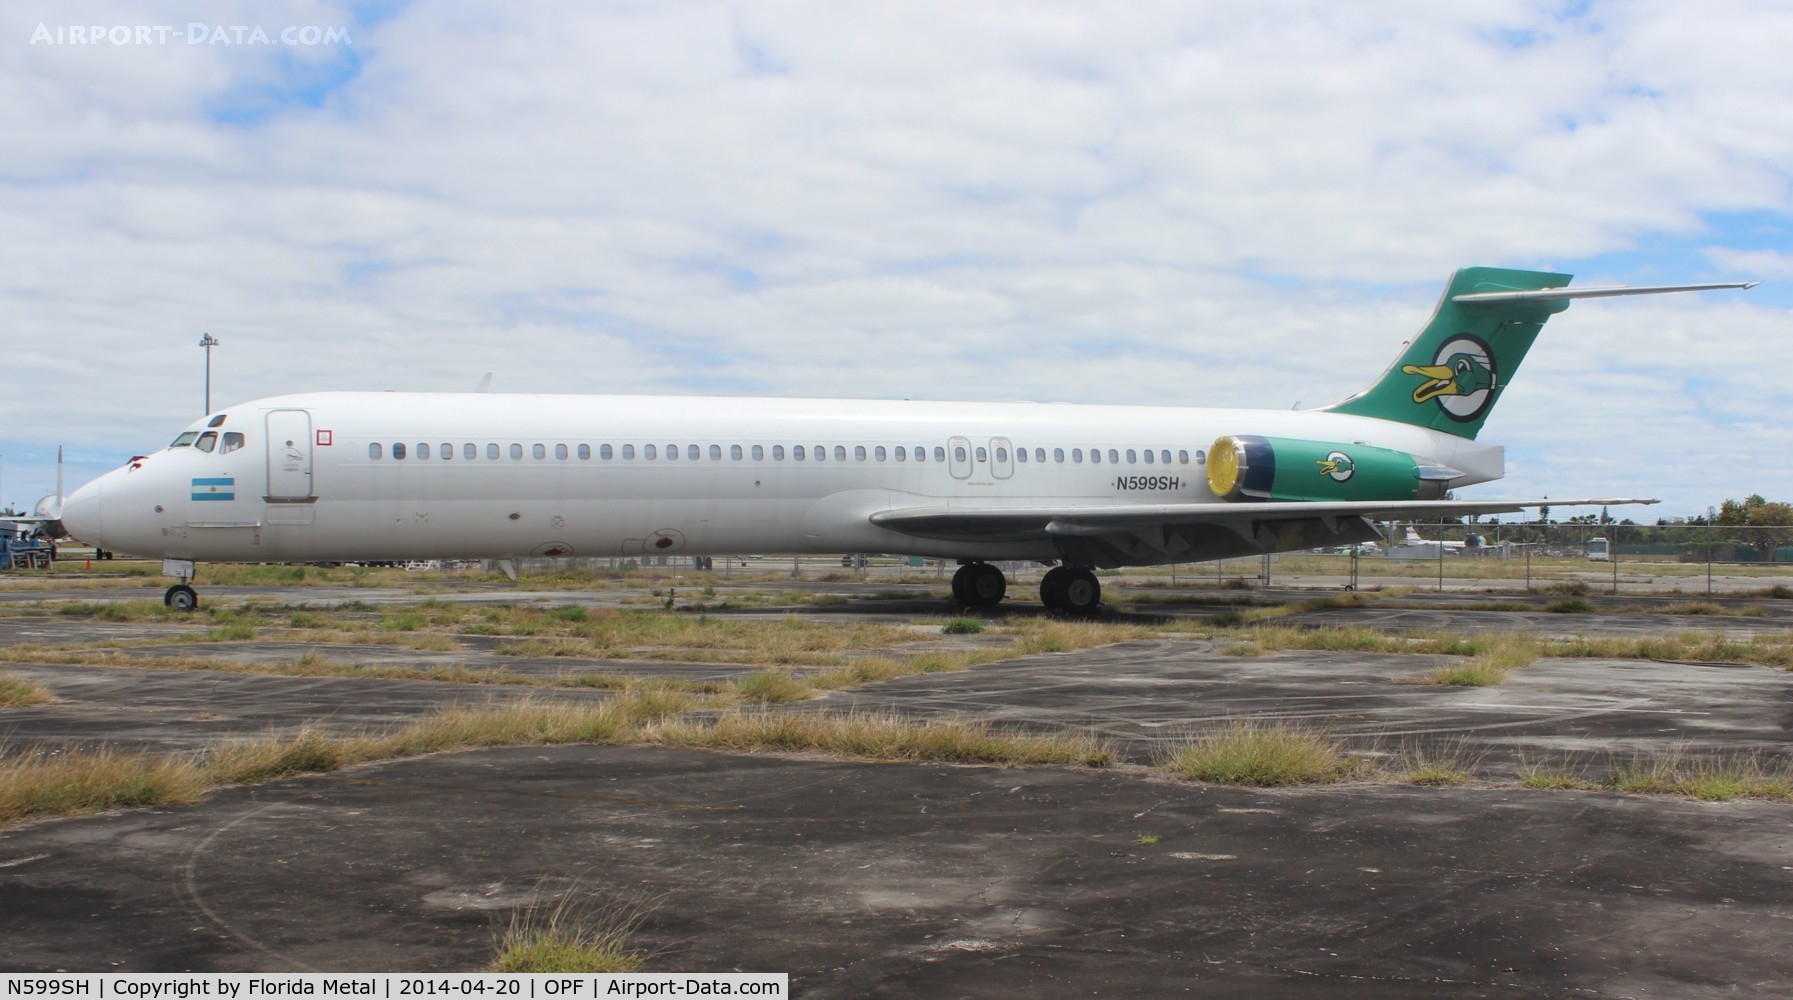 N599SH, 1988 McDonnell Douglas DC-9-87 C/N 49727, LEAL Argentina - aircraft is going to PAWA Dominicana soon